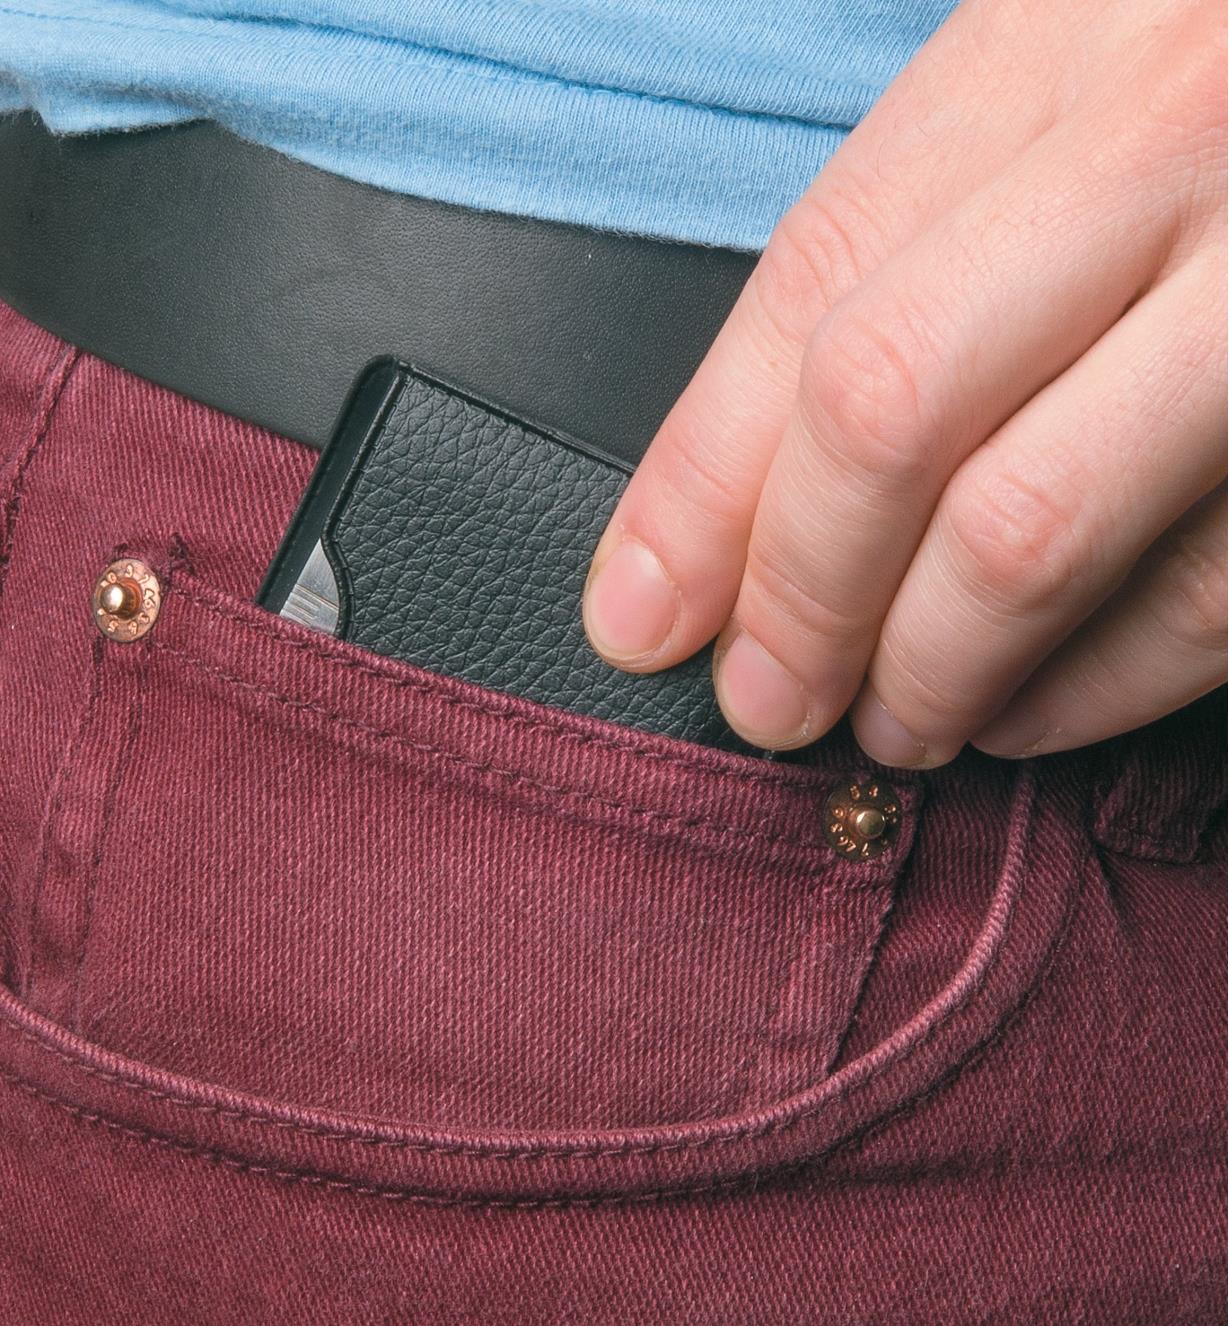 Slipping the Pocket Survival Tool into a pants pocket